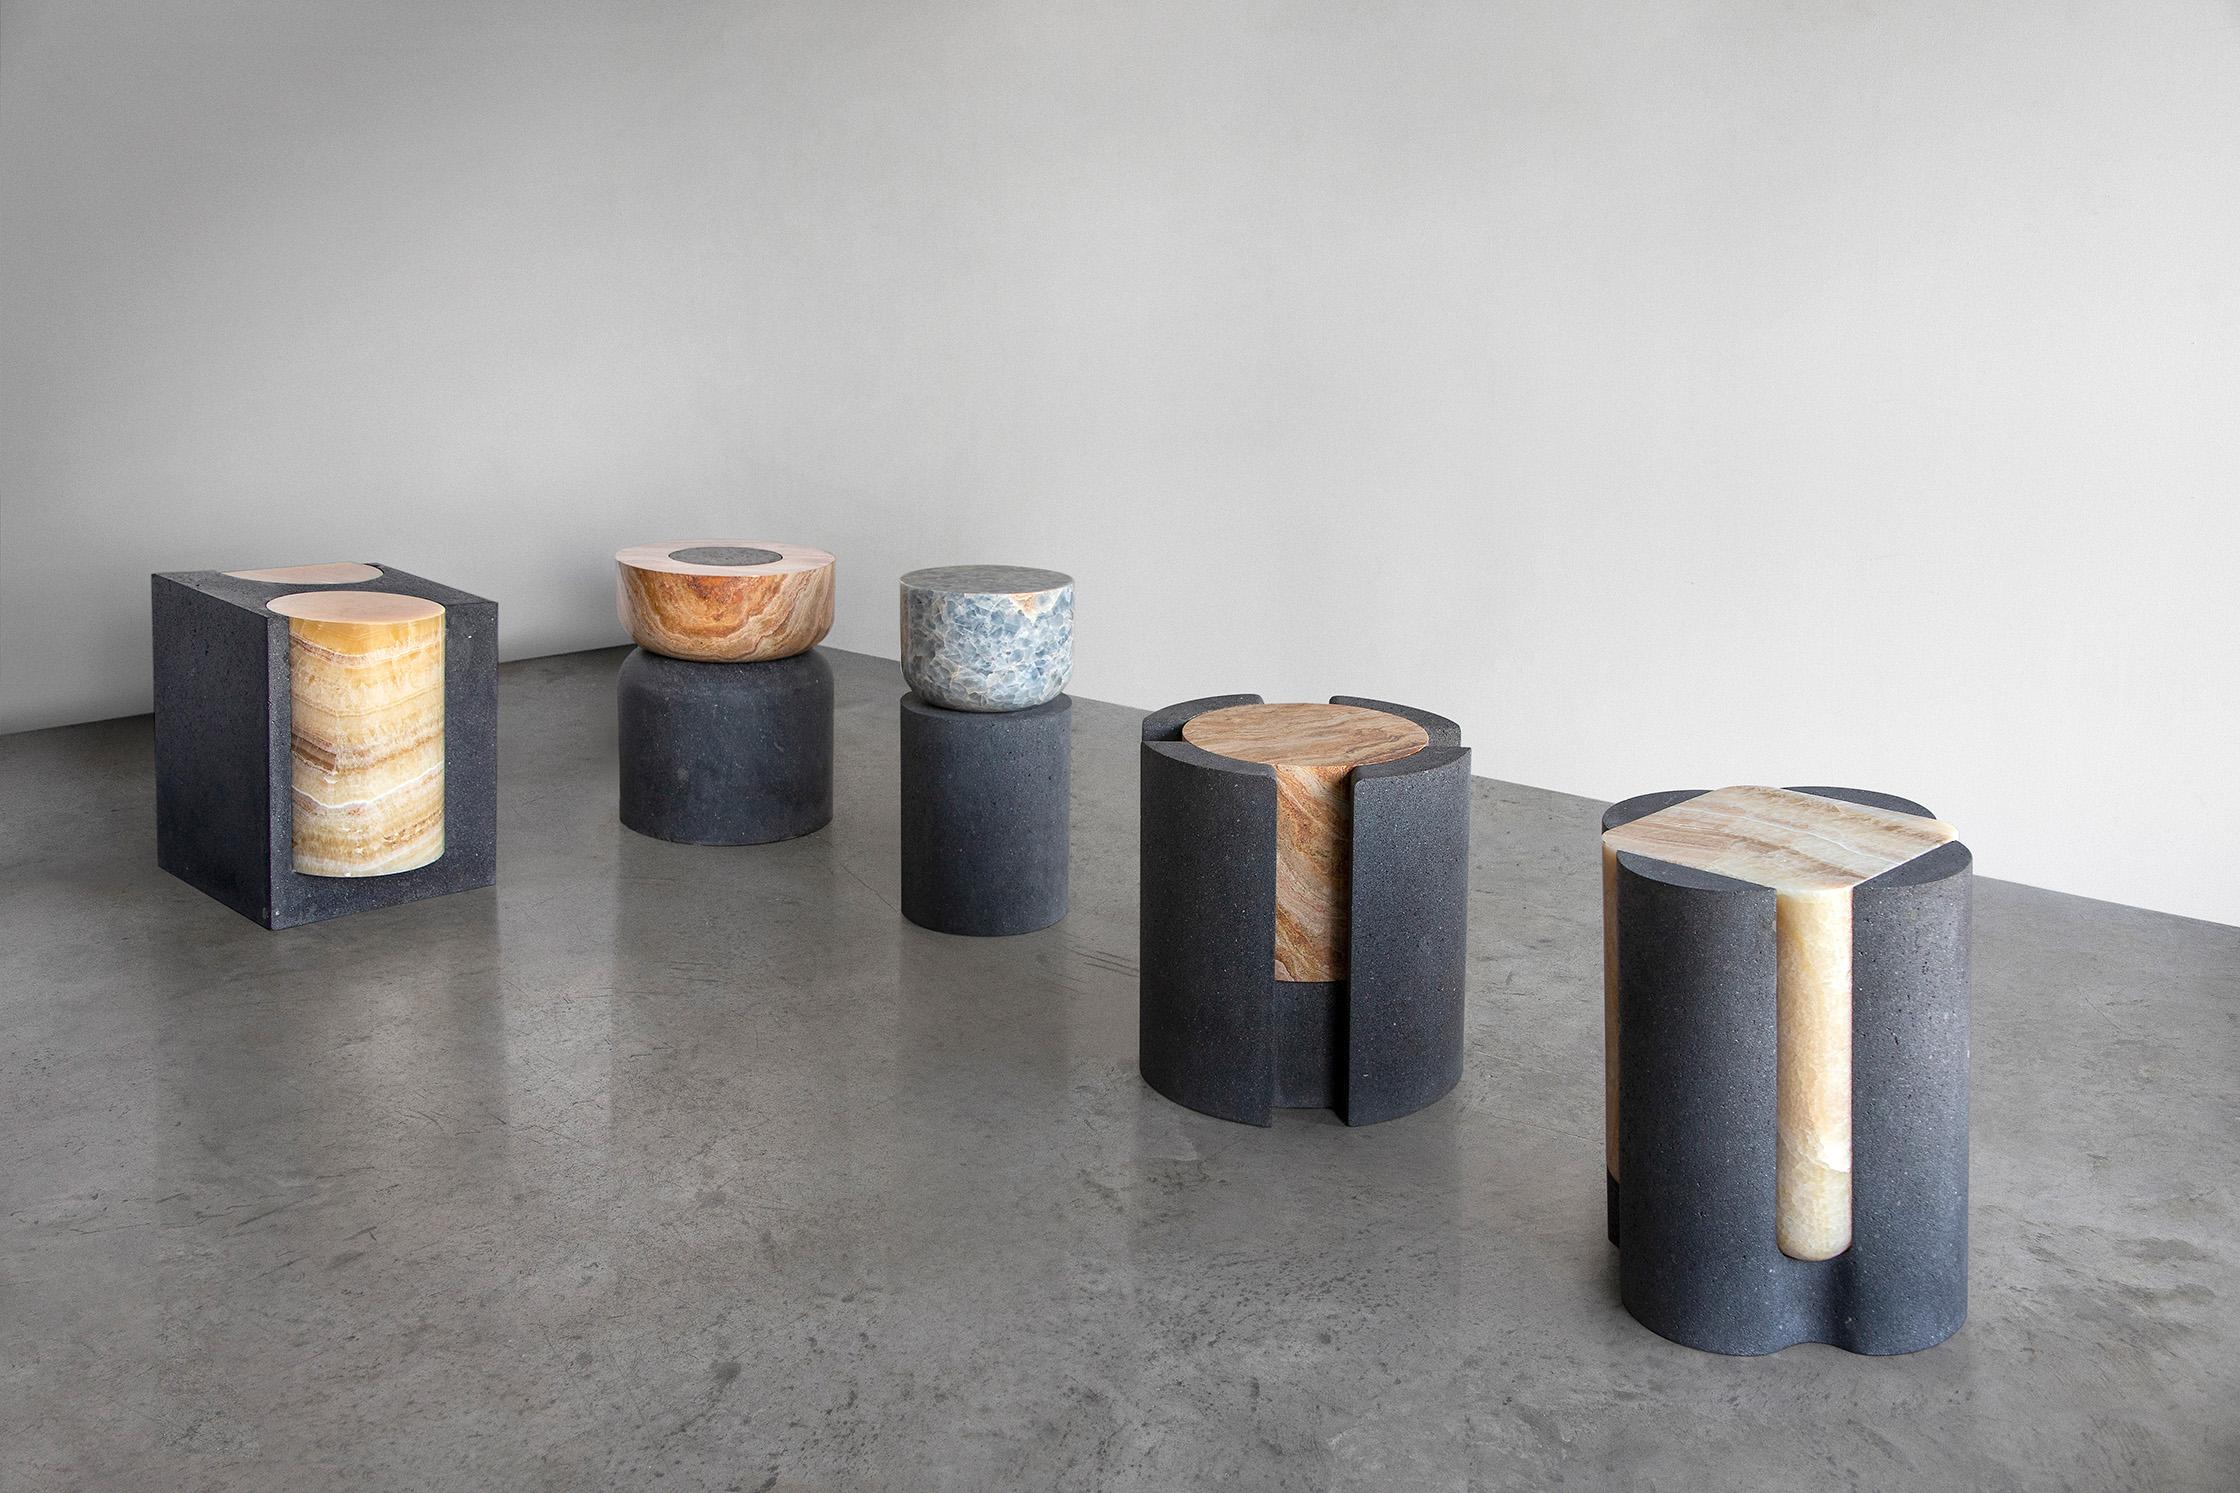 Organic Modern Volcanic Shade II Stool/Table by Sten Studio, Represented by Tuleste Factory